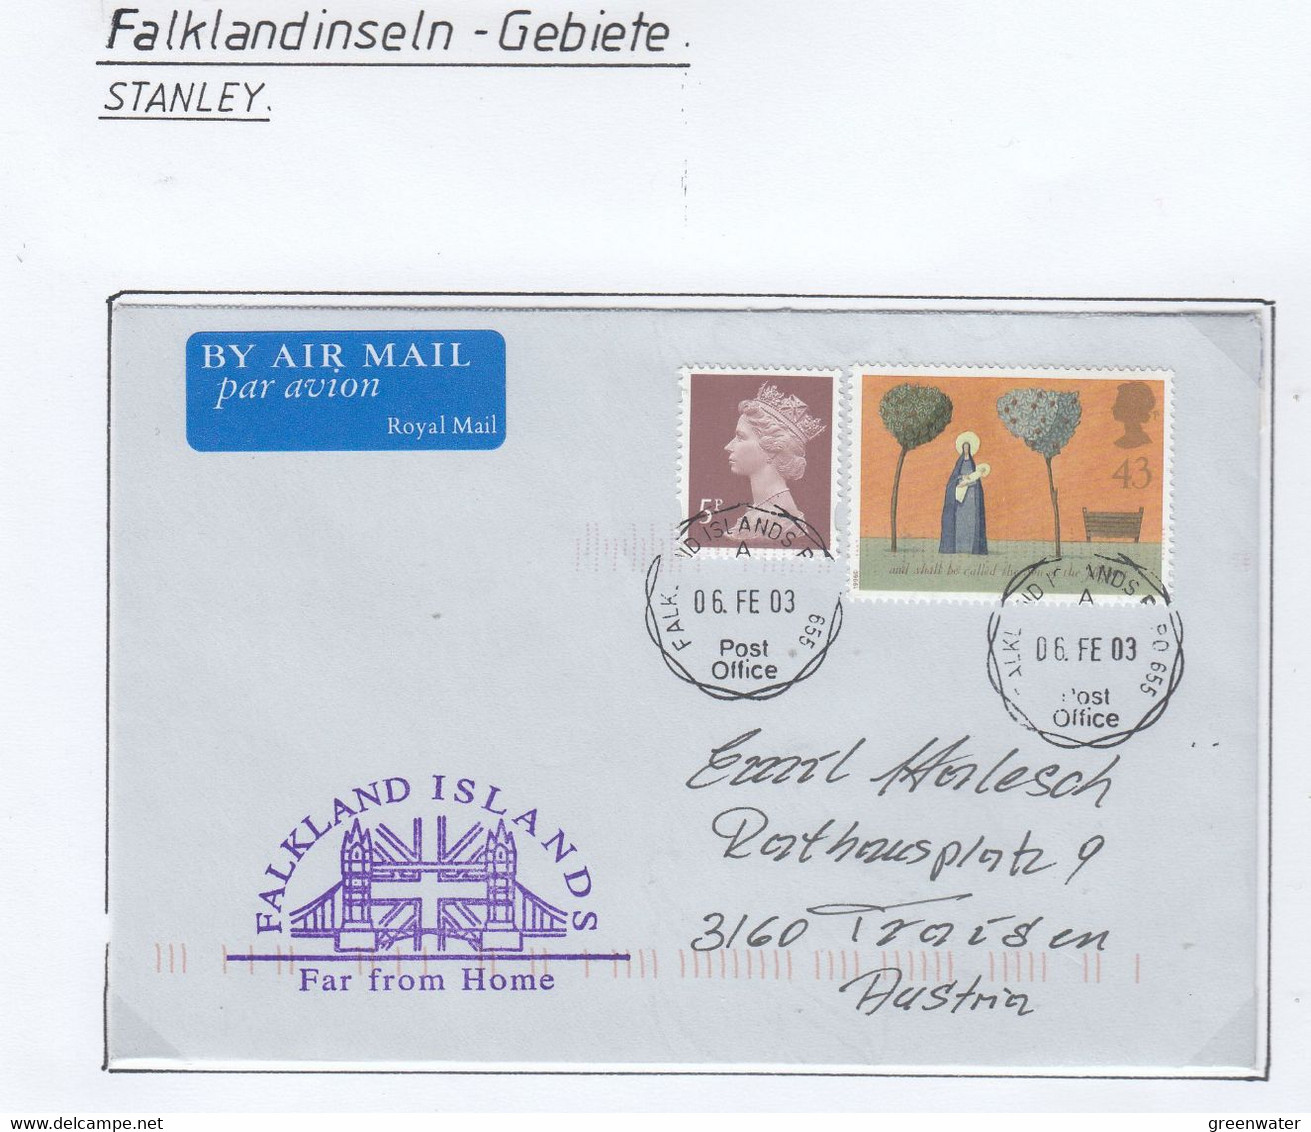 Falkland Islands 2003 Cover British Forces In The Falklands  Ca BFPO655  06 FE 03  (FL208B) - Falkland Islands